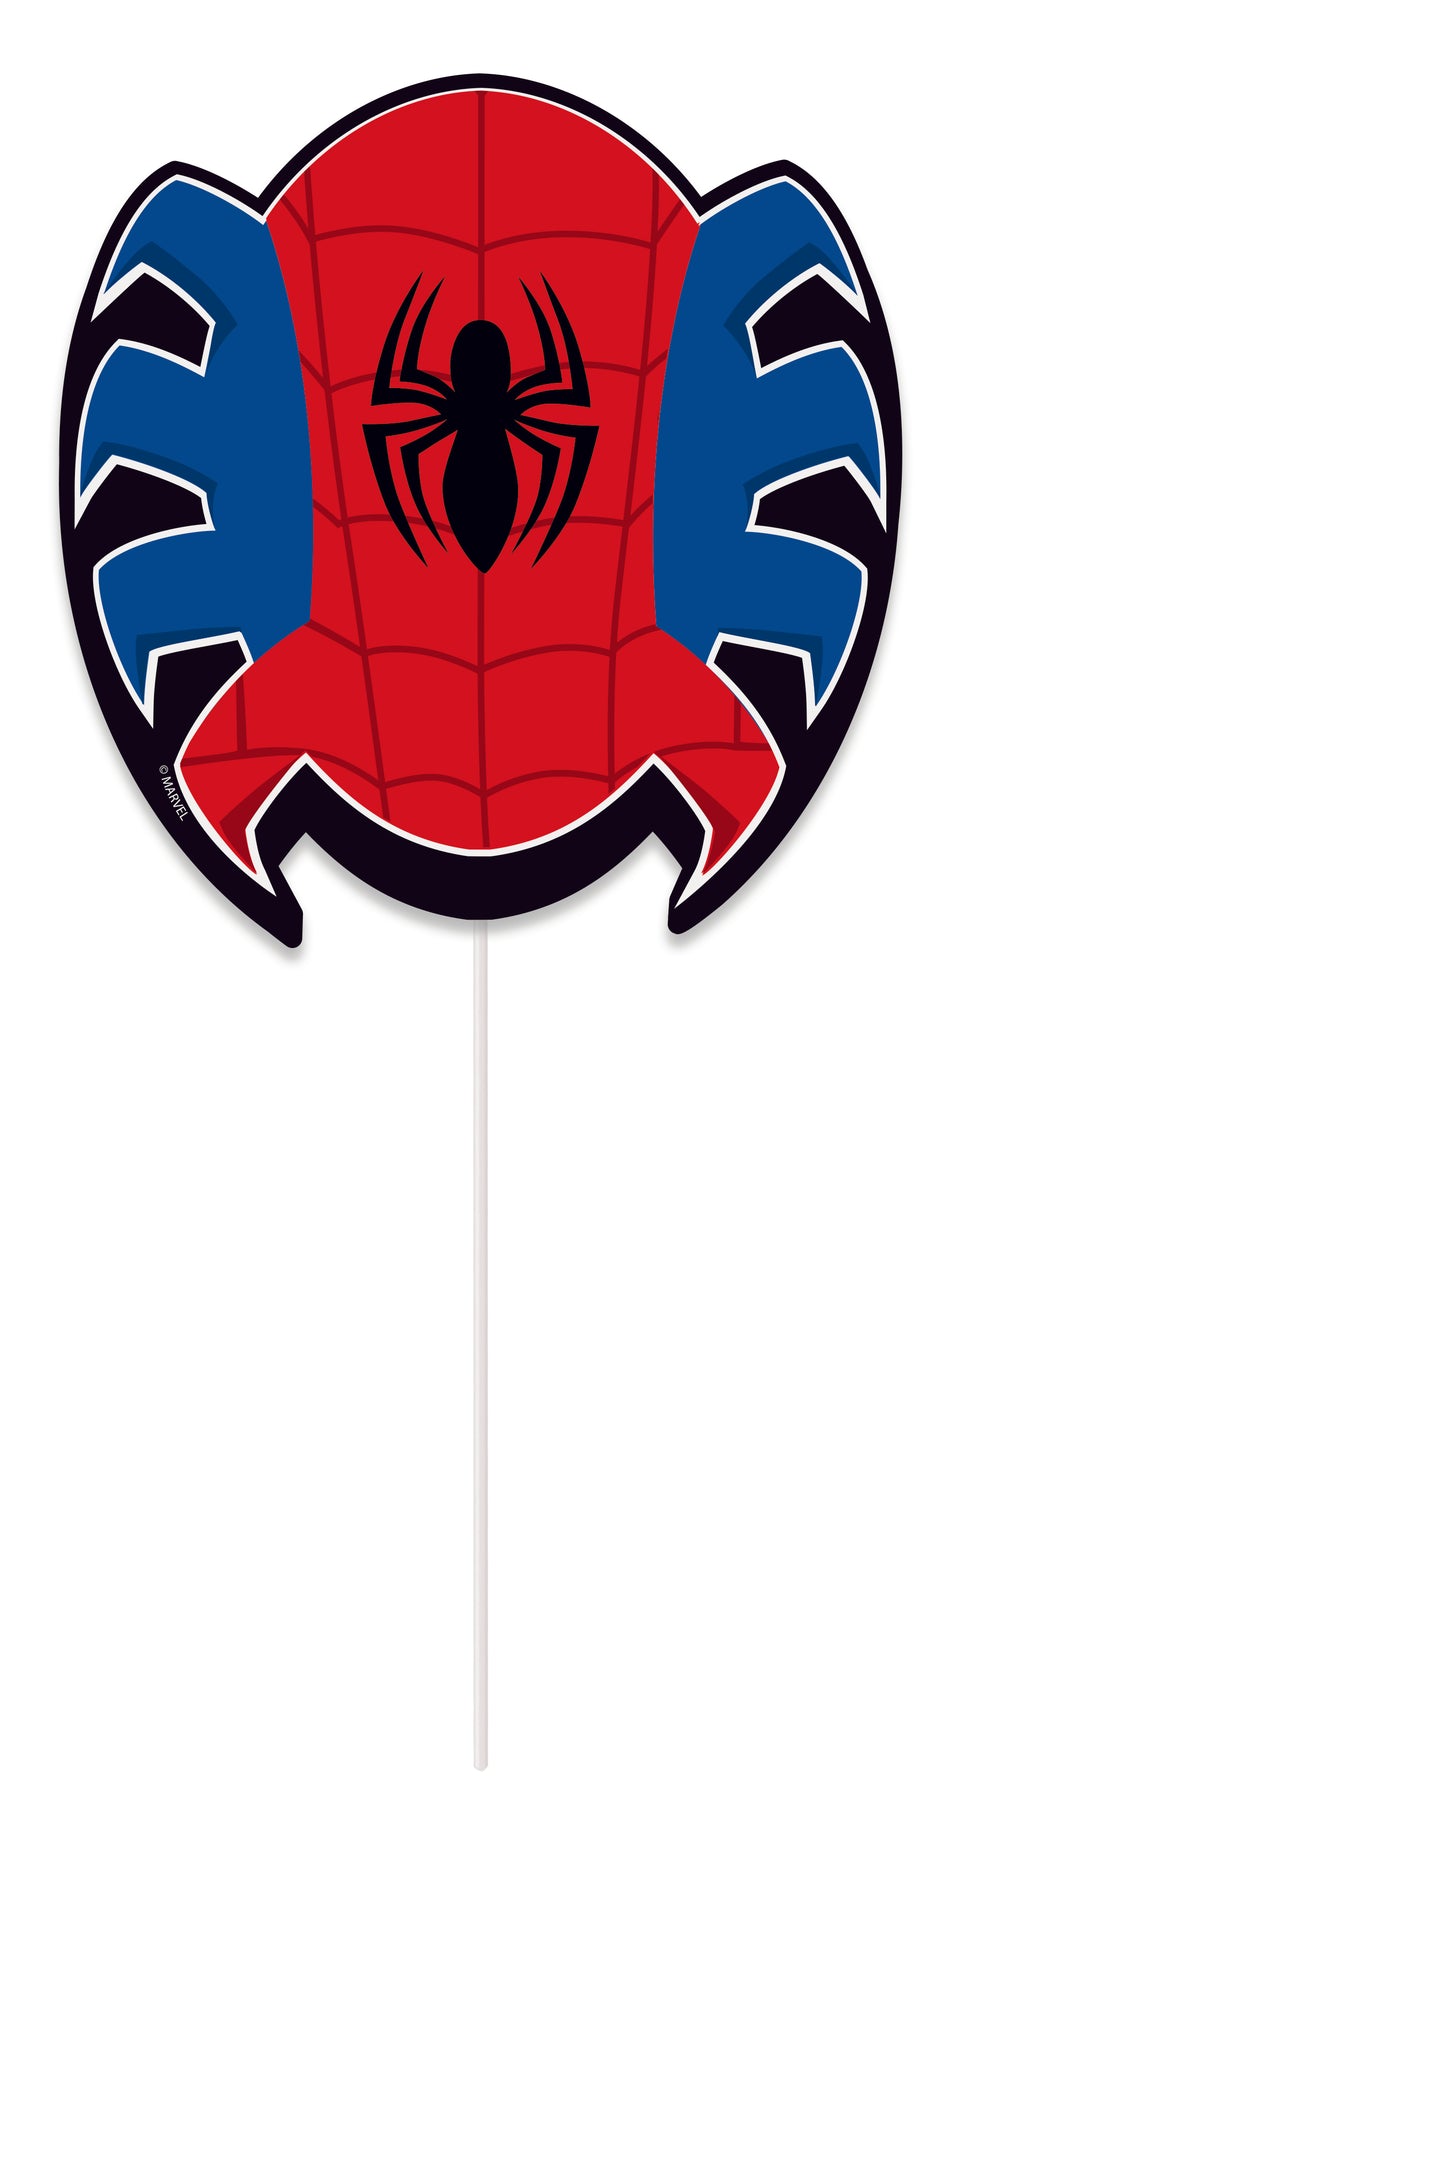 Ultimate Spider-Man Photo Booth Props, 8-pc